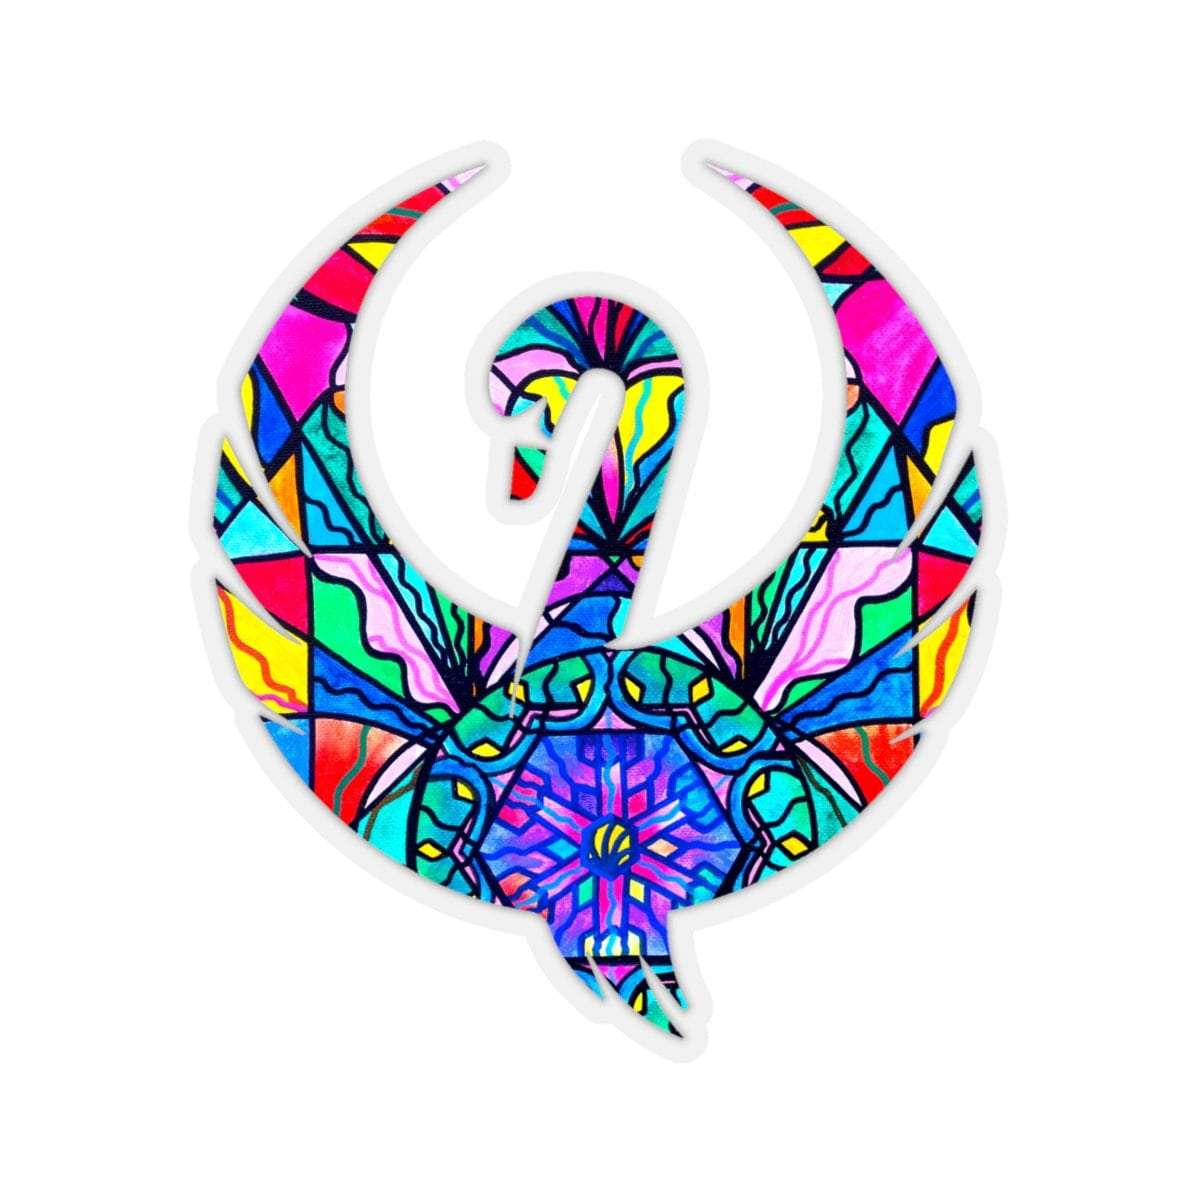 be-the-first-to-own-the-newest-anahata-heart-chakra-swan-stickers-supply_7.jpg